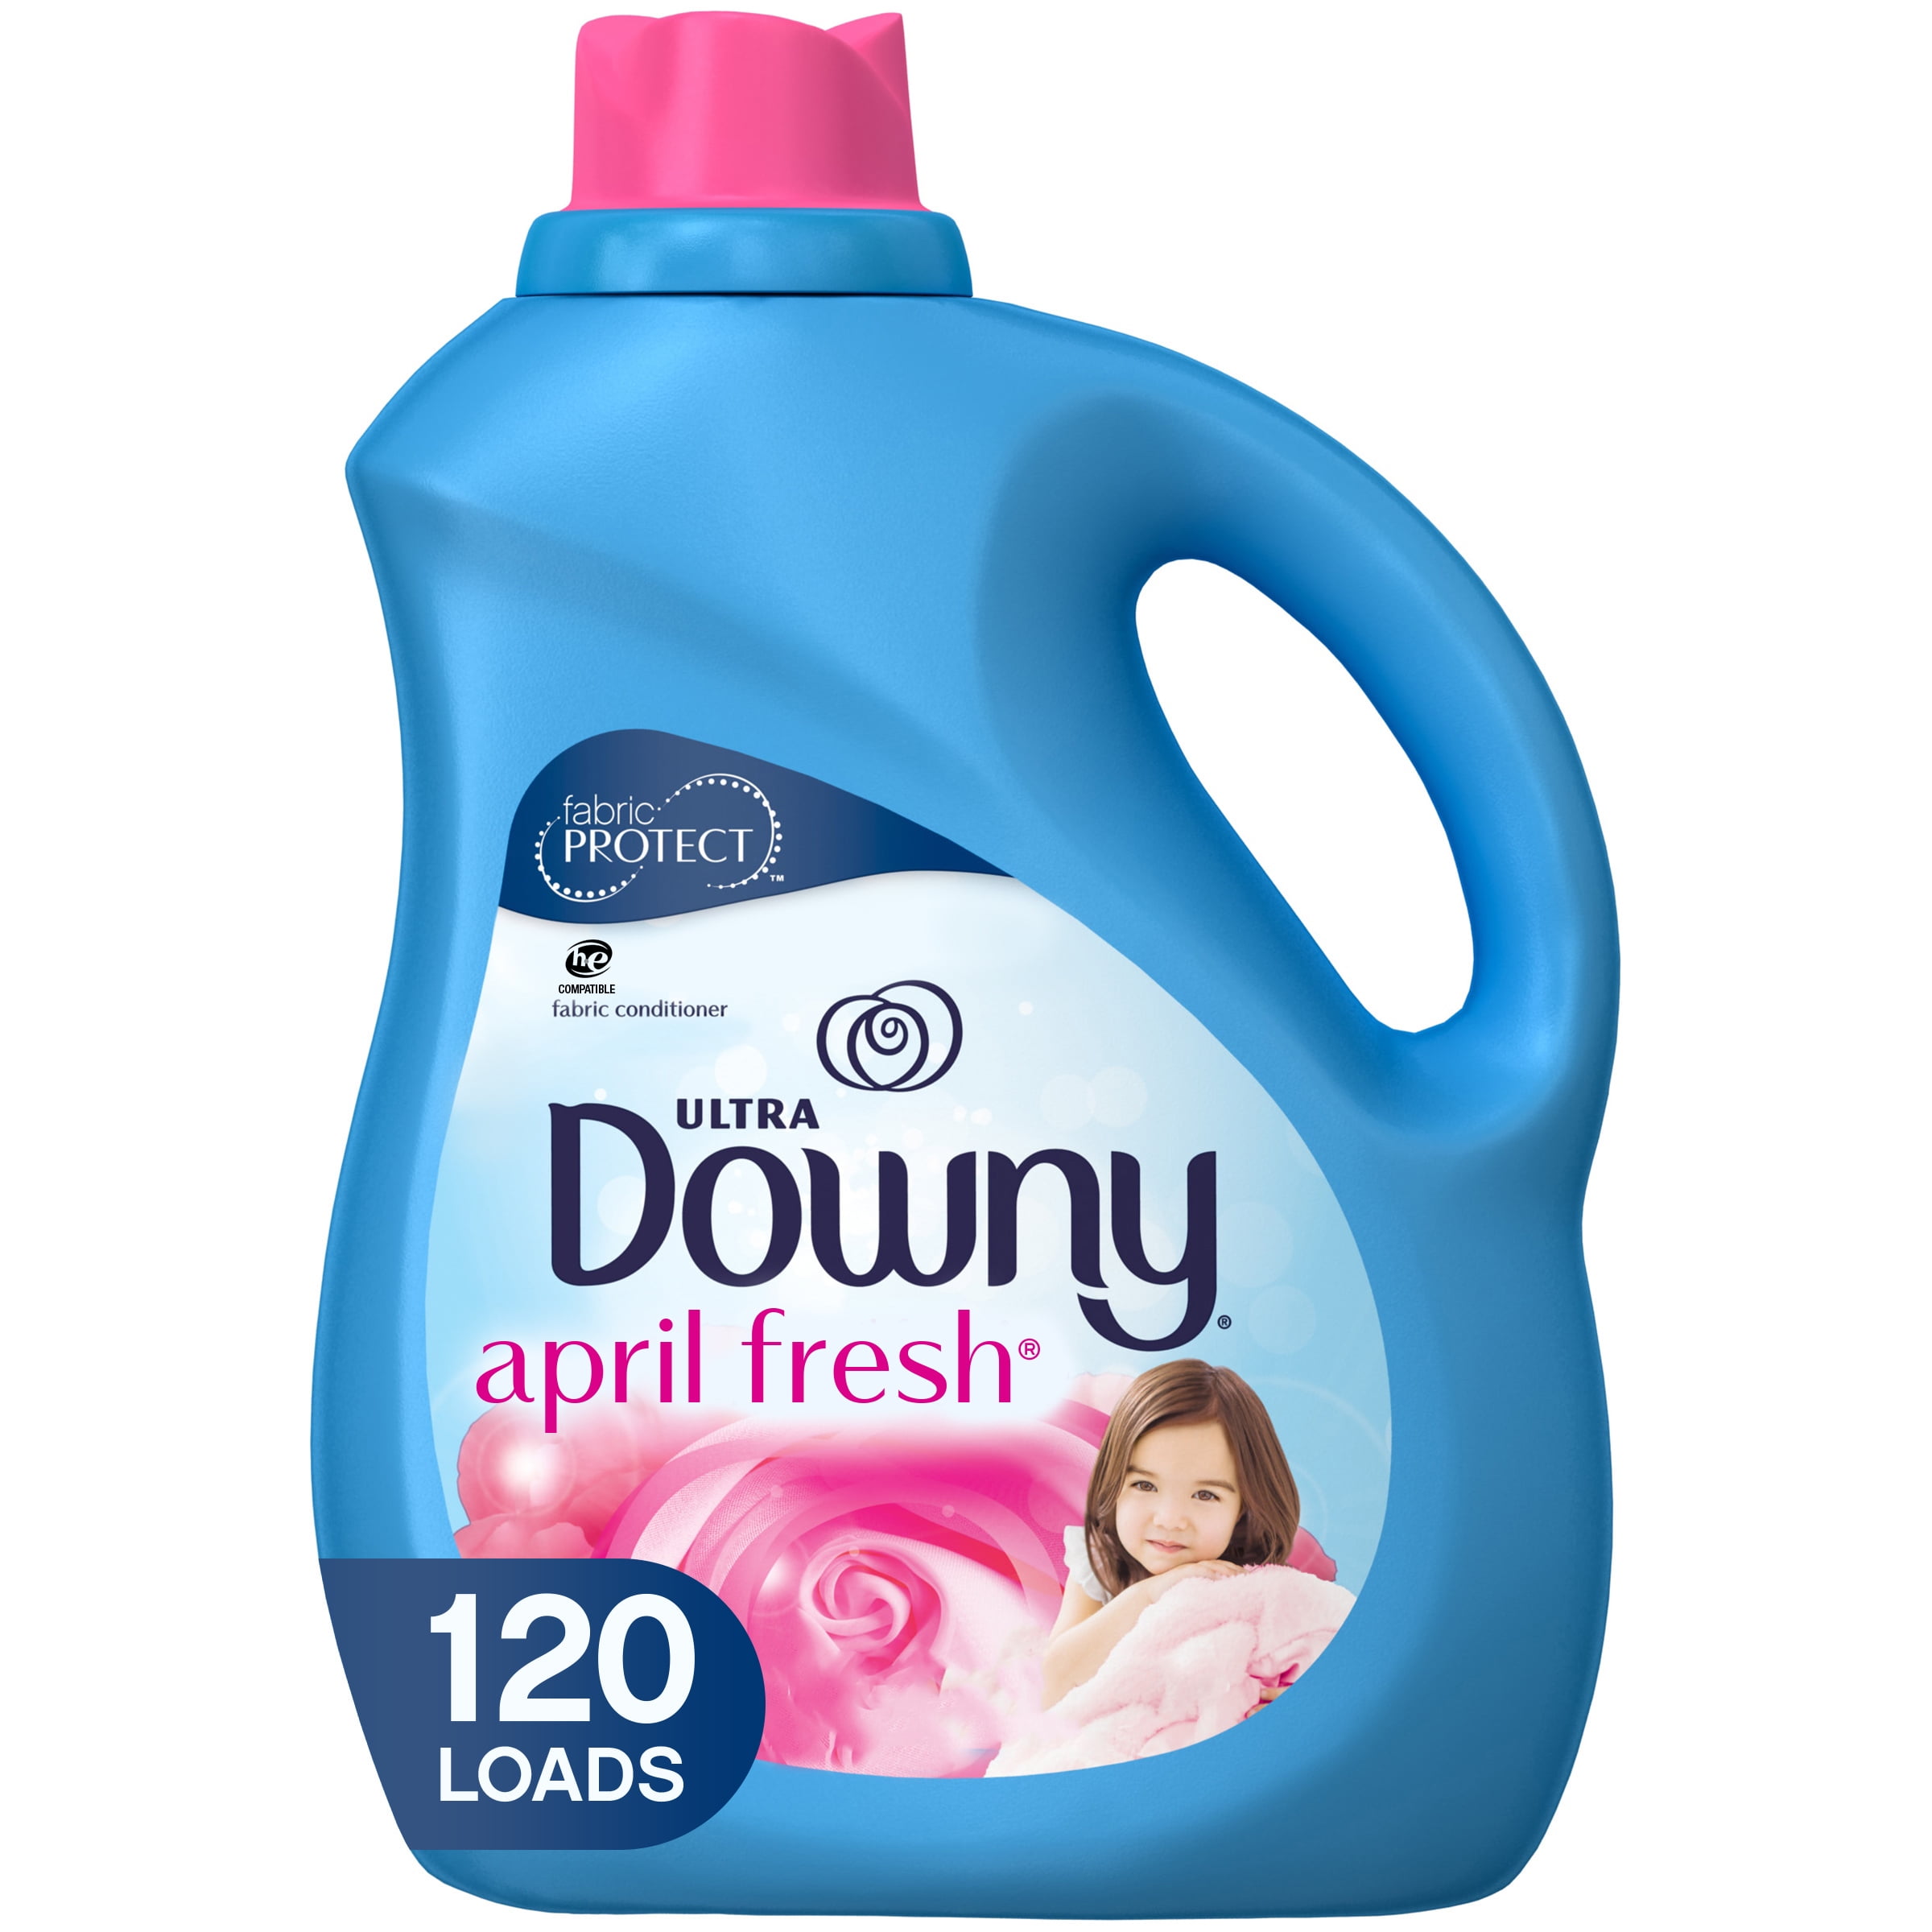 Downy Laundry Fabric Softner Automatic Dispenser Container Blue Ball New 